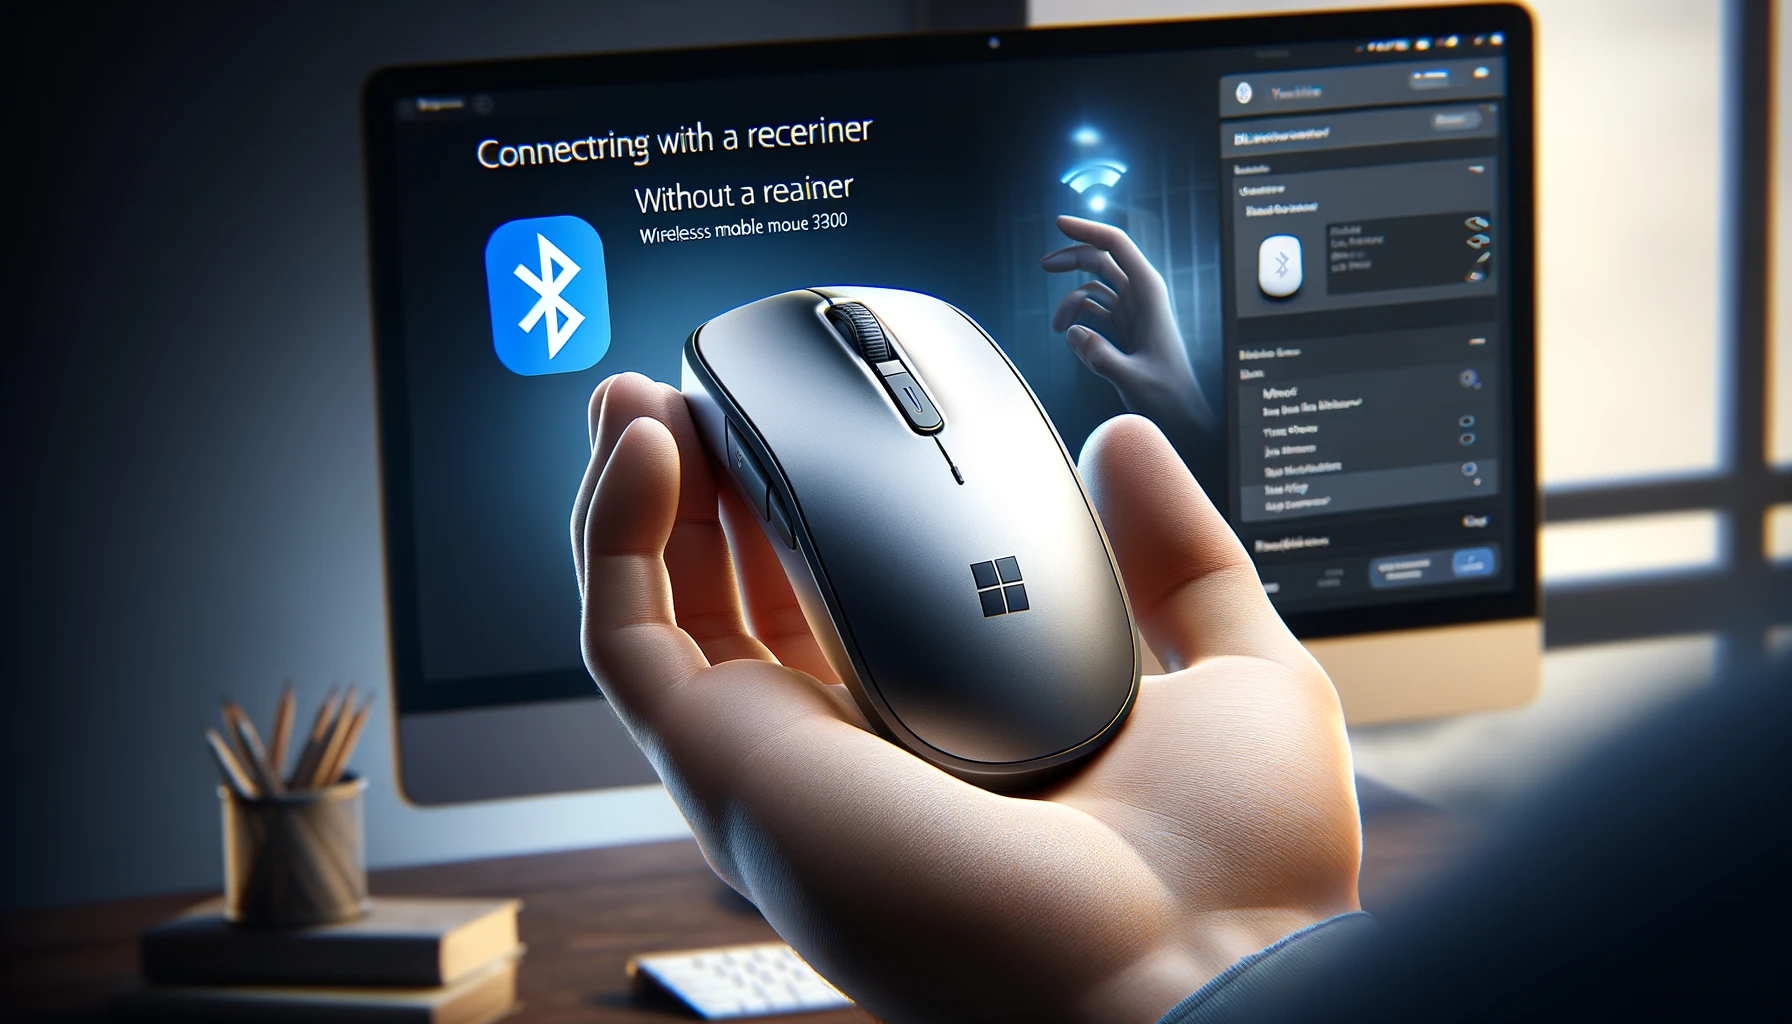 How To Connect Microsoft Wireless Mobile Mouse 3500 Without Receiver